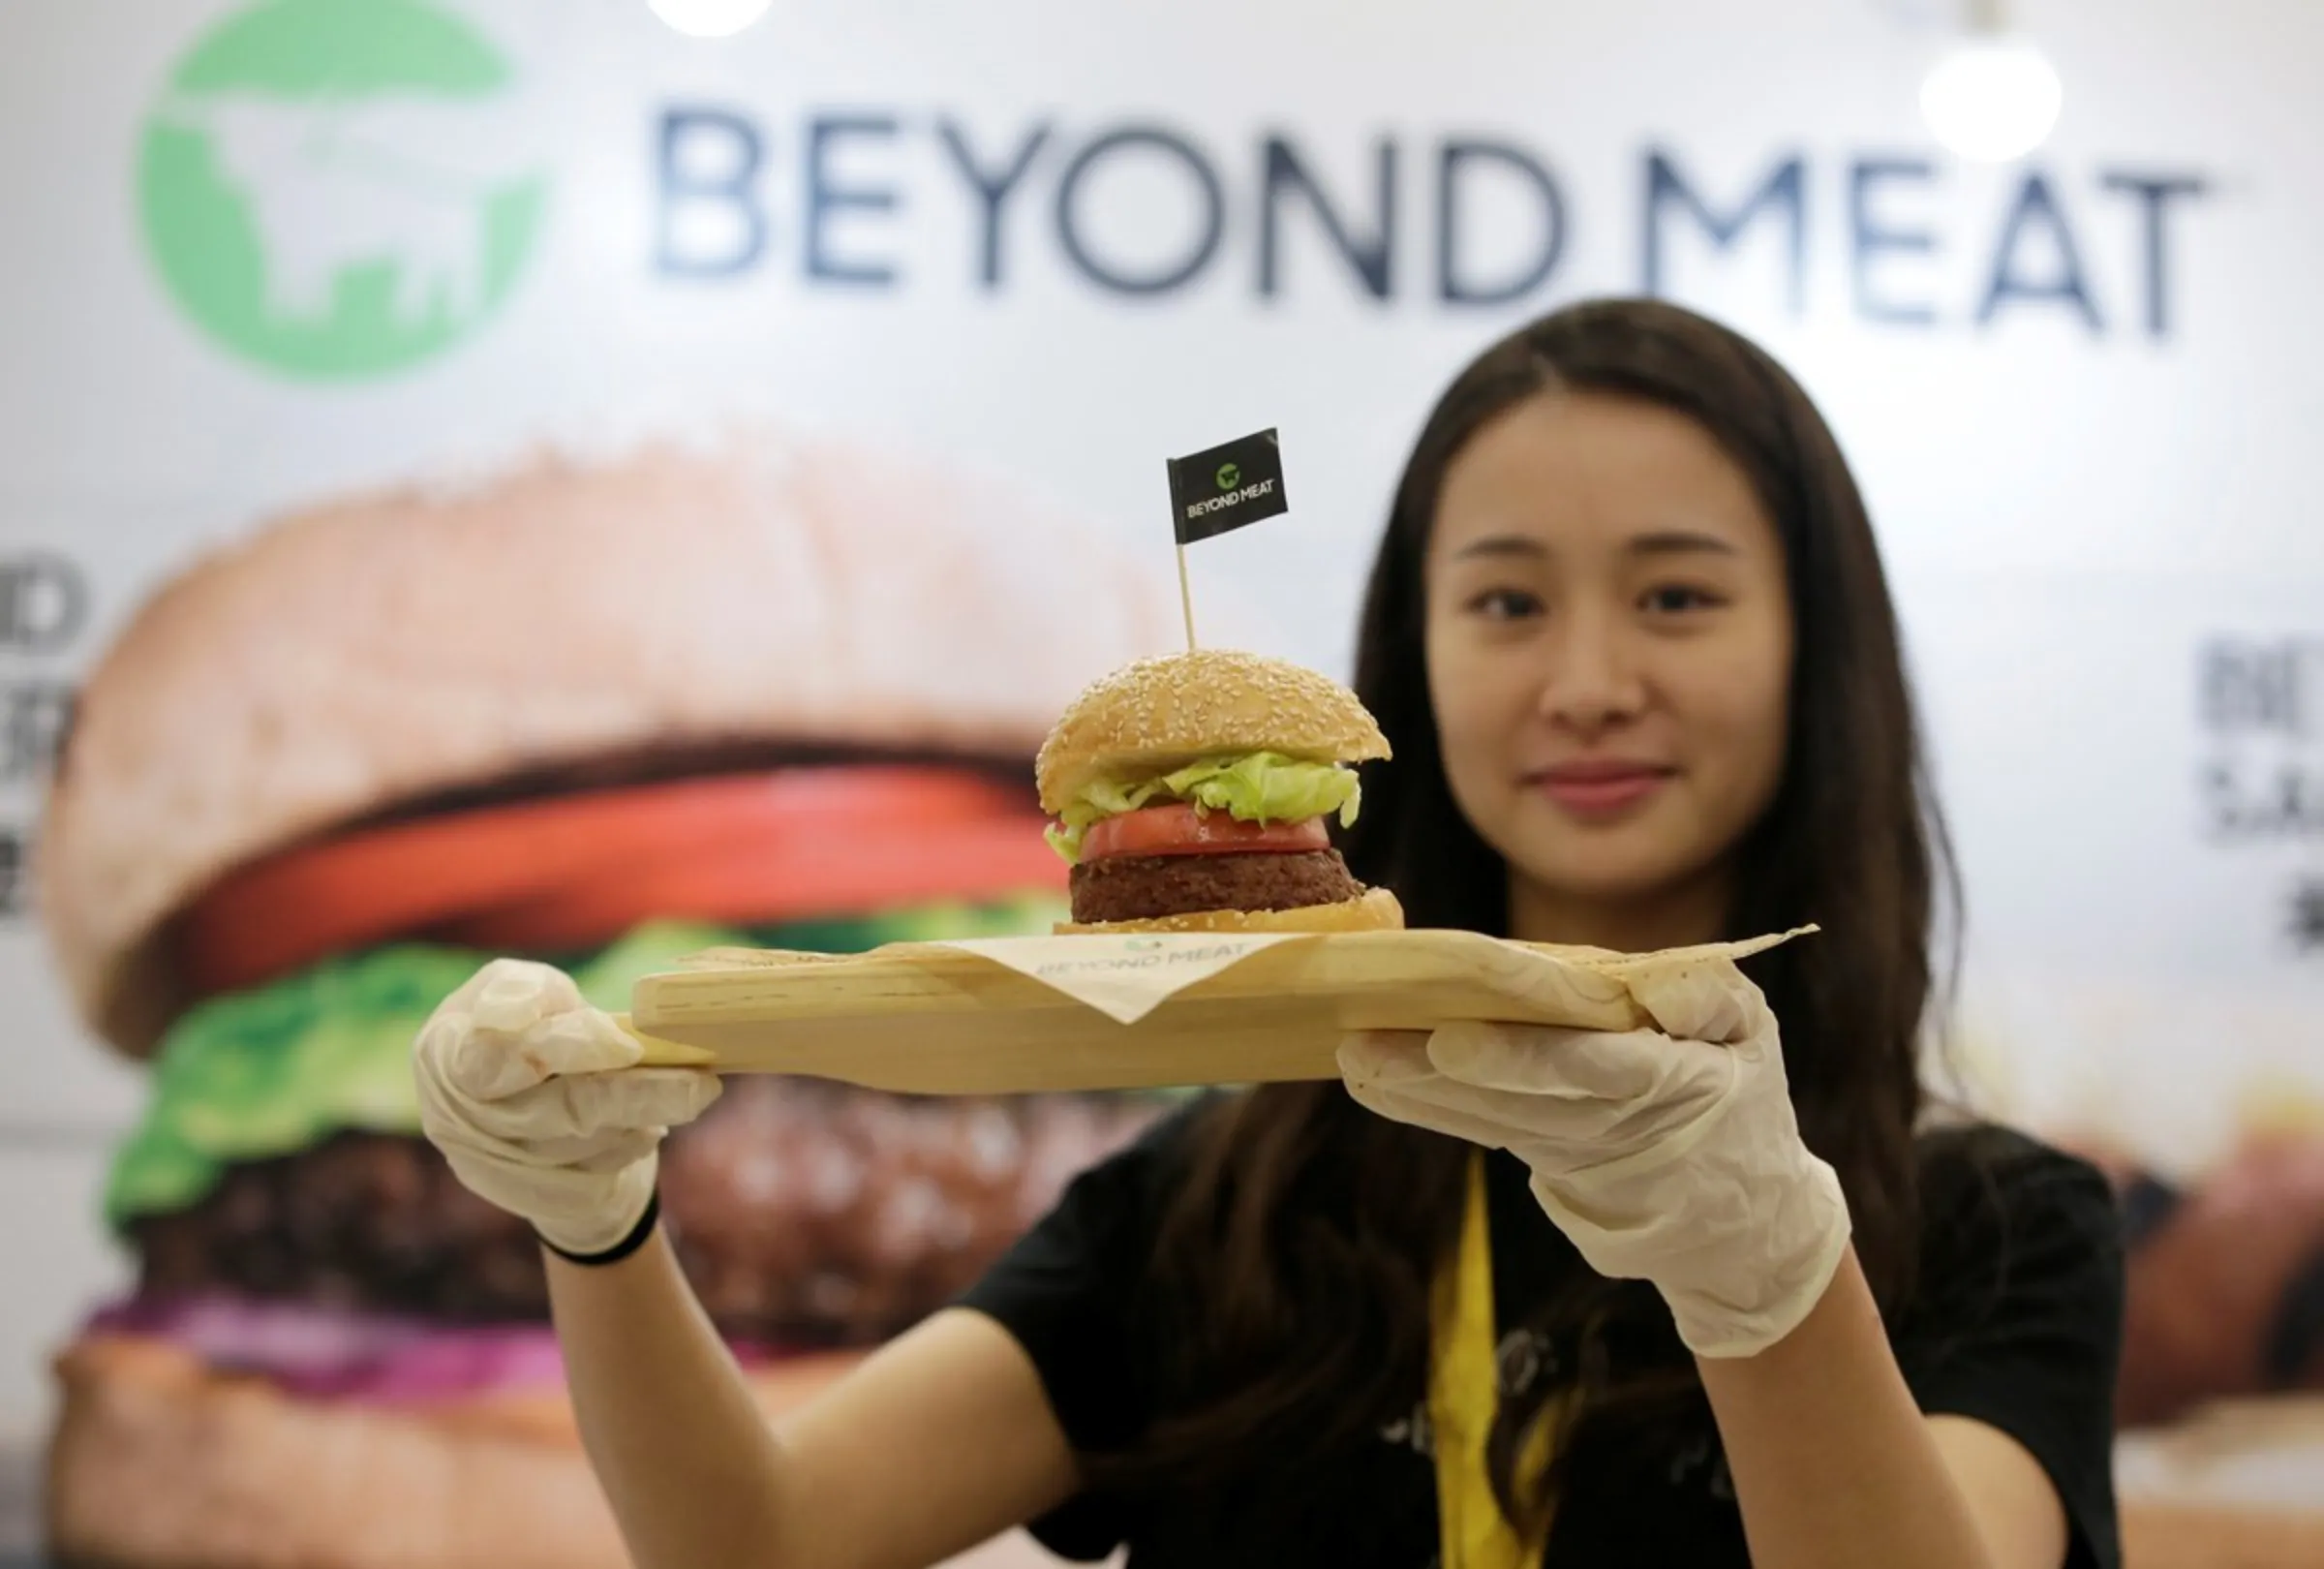 A staff member displays a burger with a Beyond Meat plant-based patty at VeggieWorld fair in Beijing, China November 8, 2019.